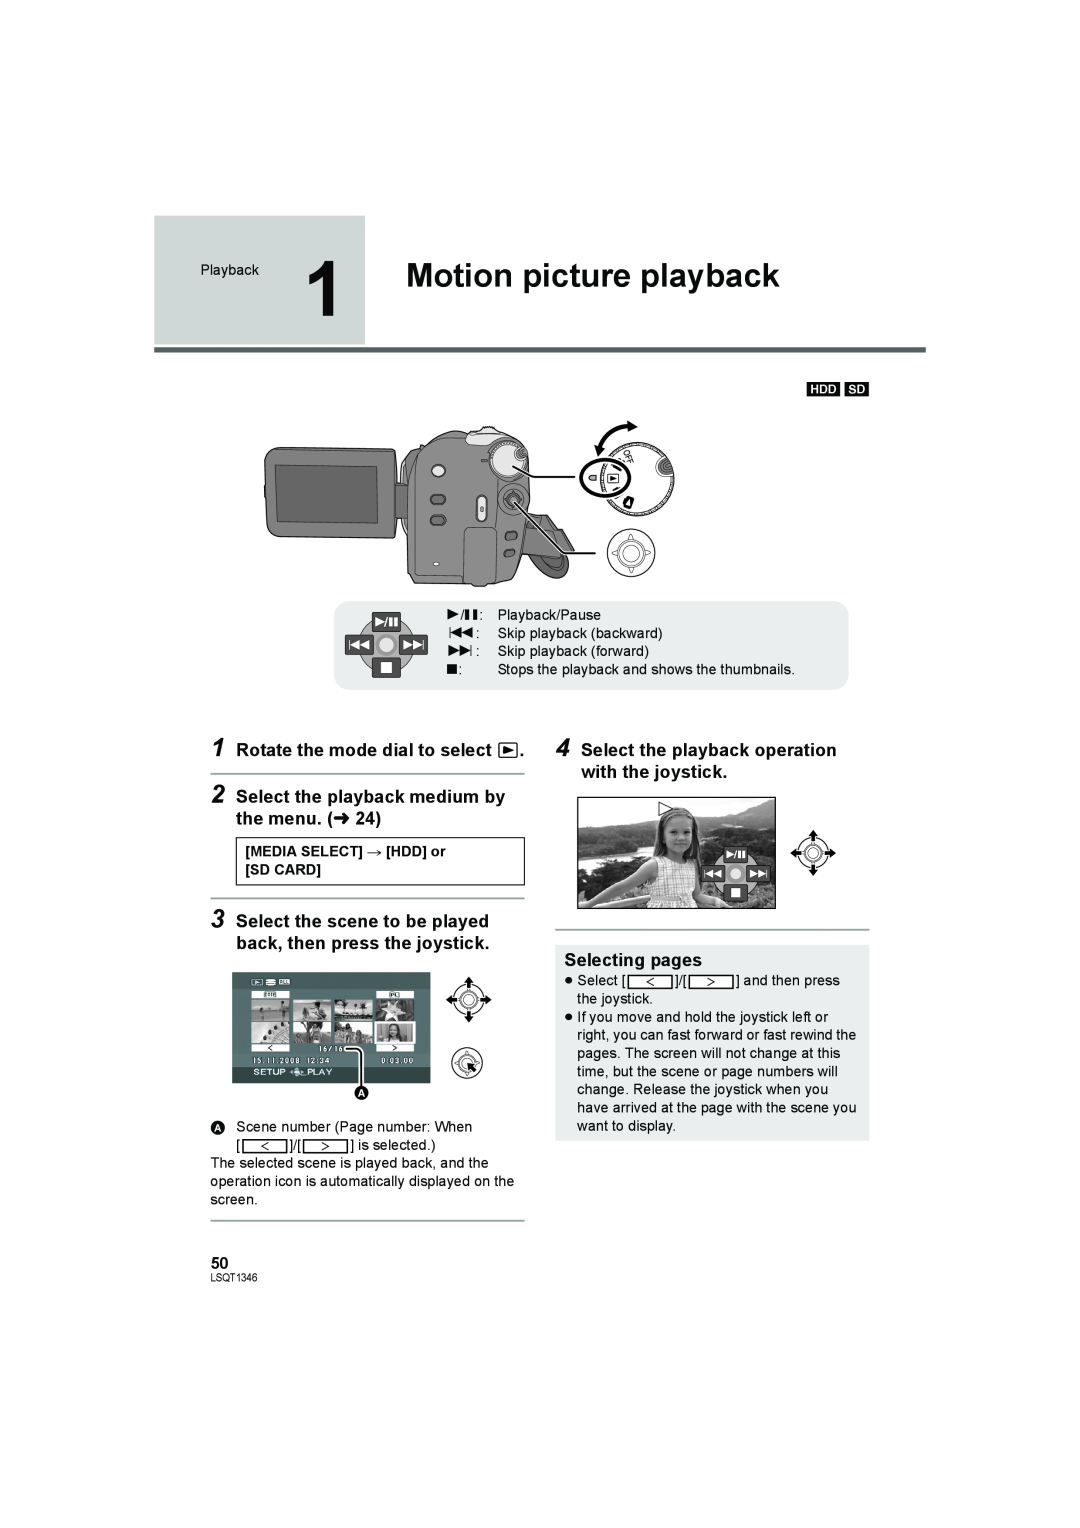 Panasonic SDR-H50 Motion picture playback, Rotate the mode dial to select, Select the playback medium by the menu. l24 